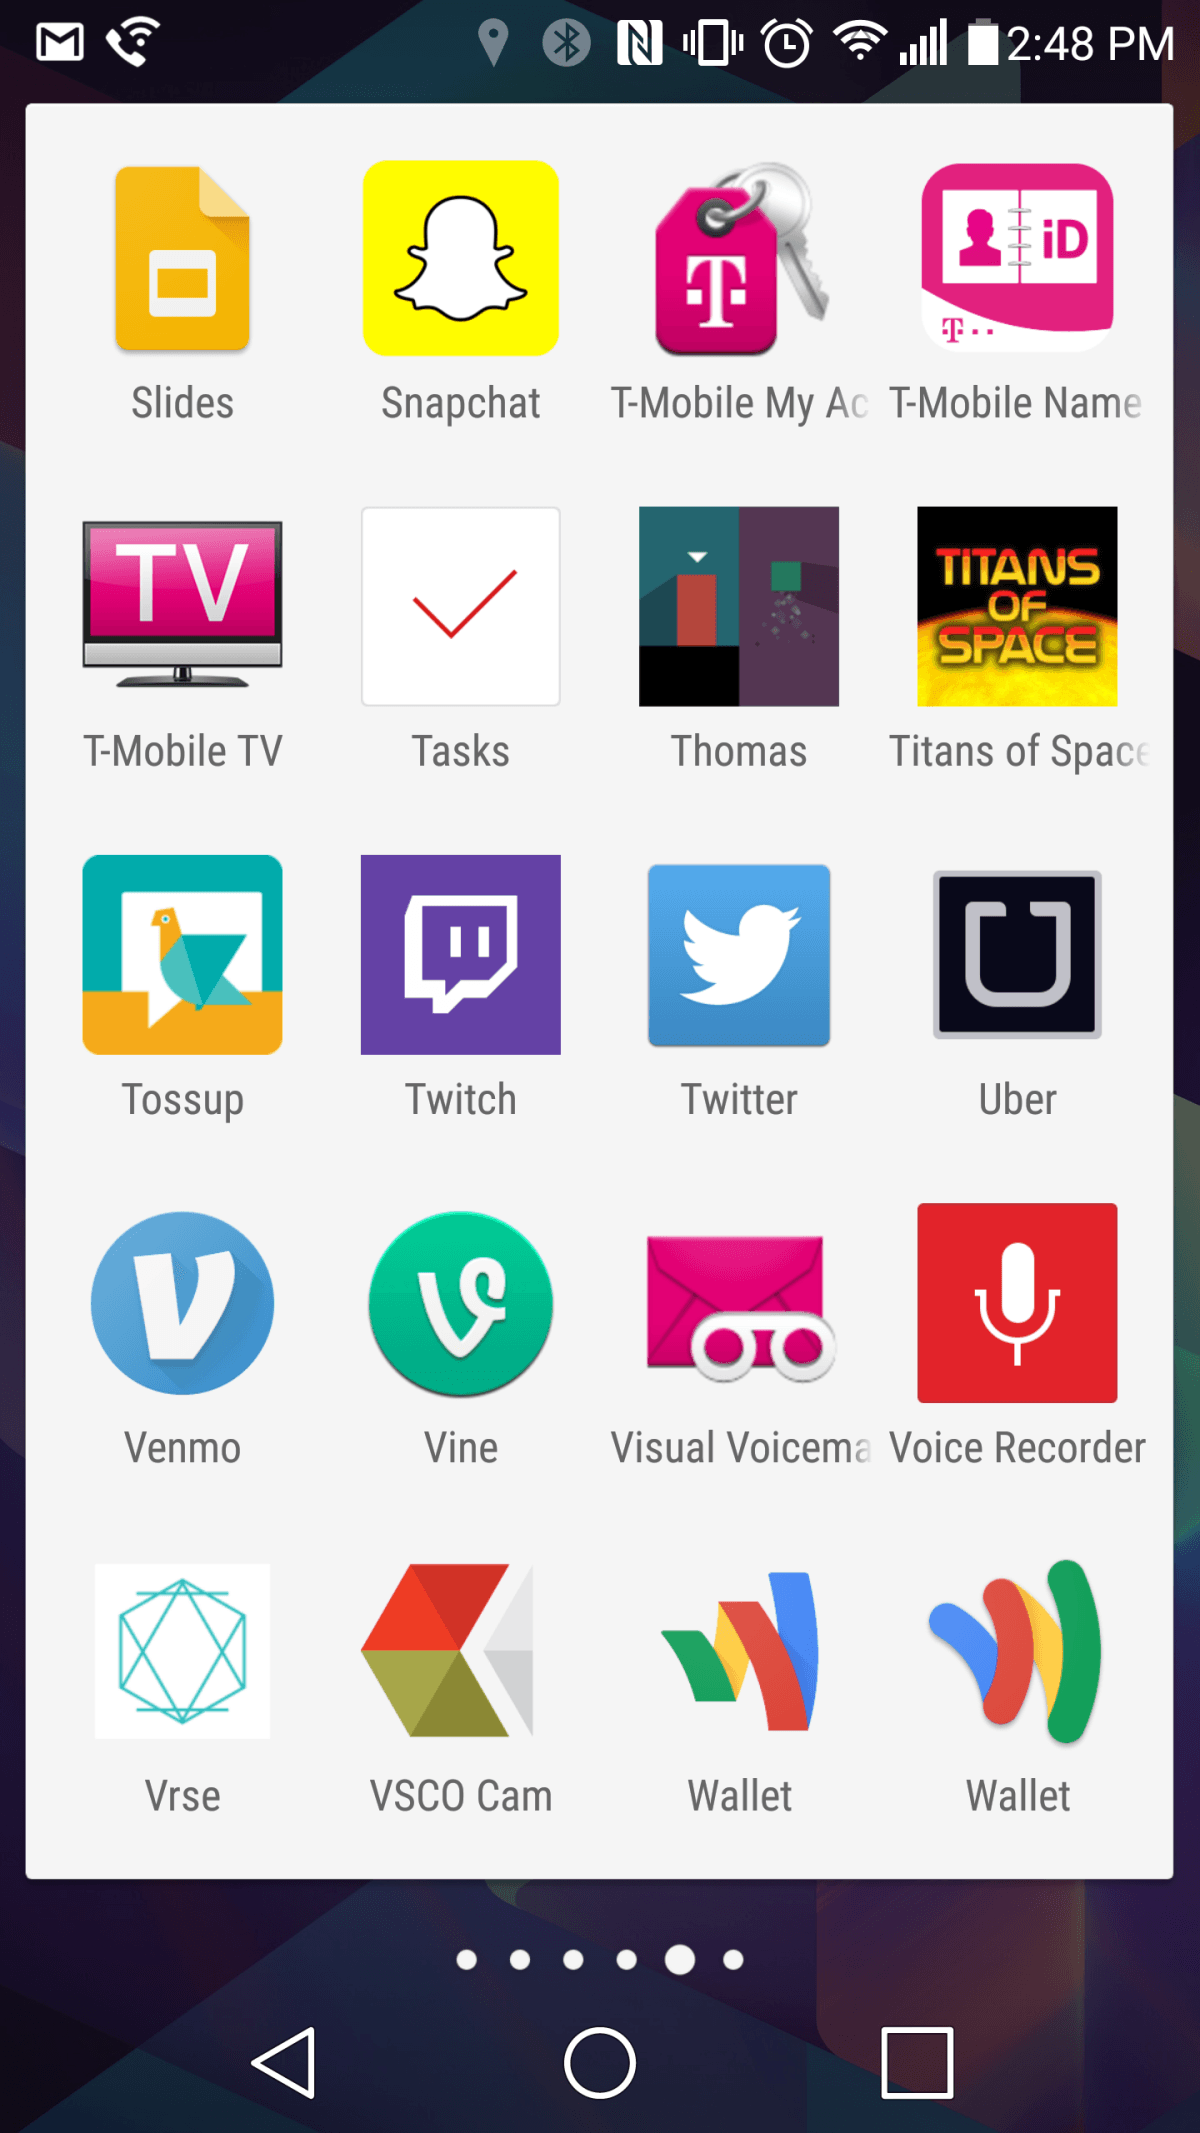 Google Wallet App Logo - Google just launched Android Pay, so why do I have two Wallet apps?